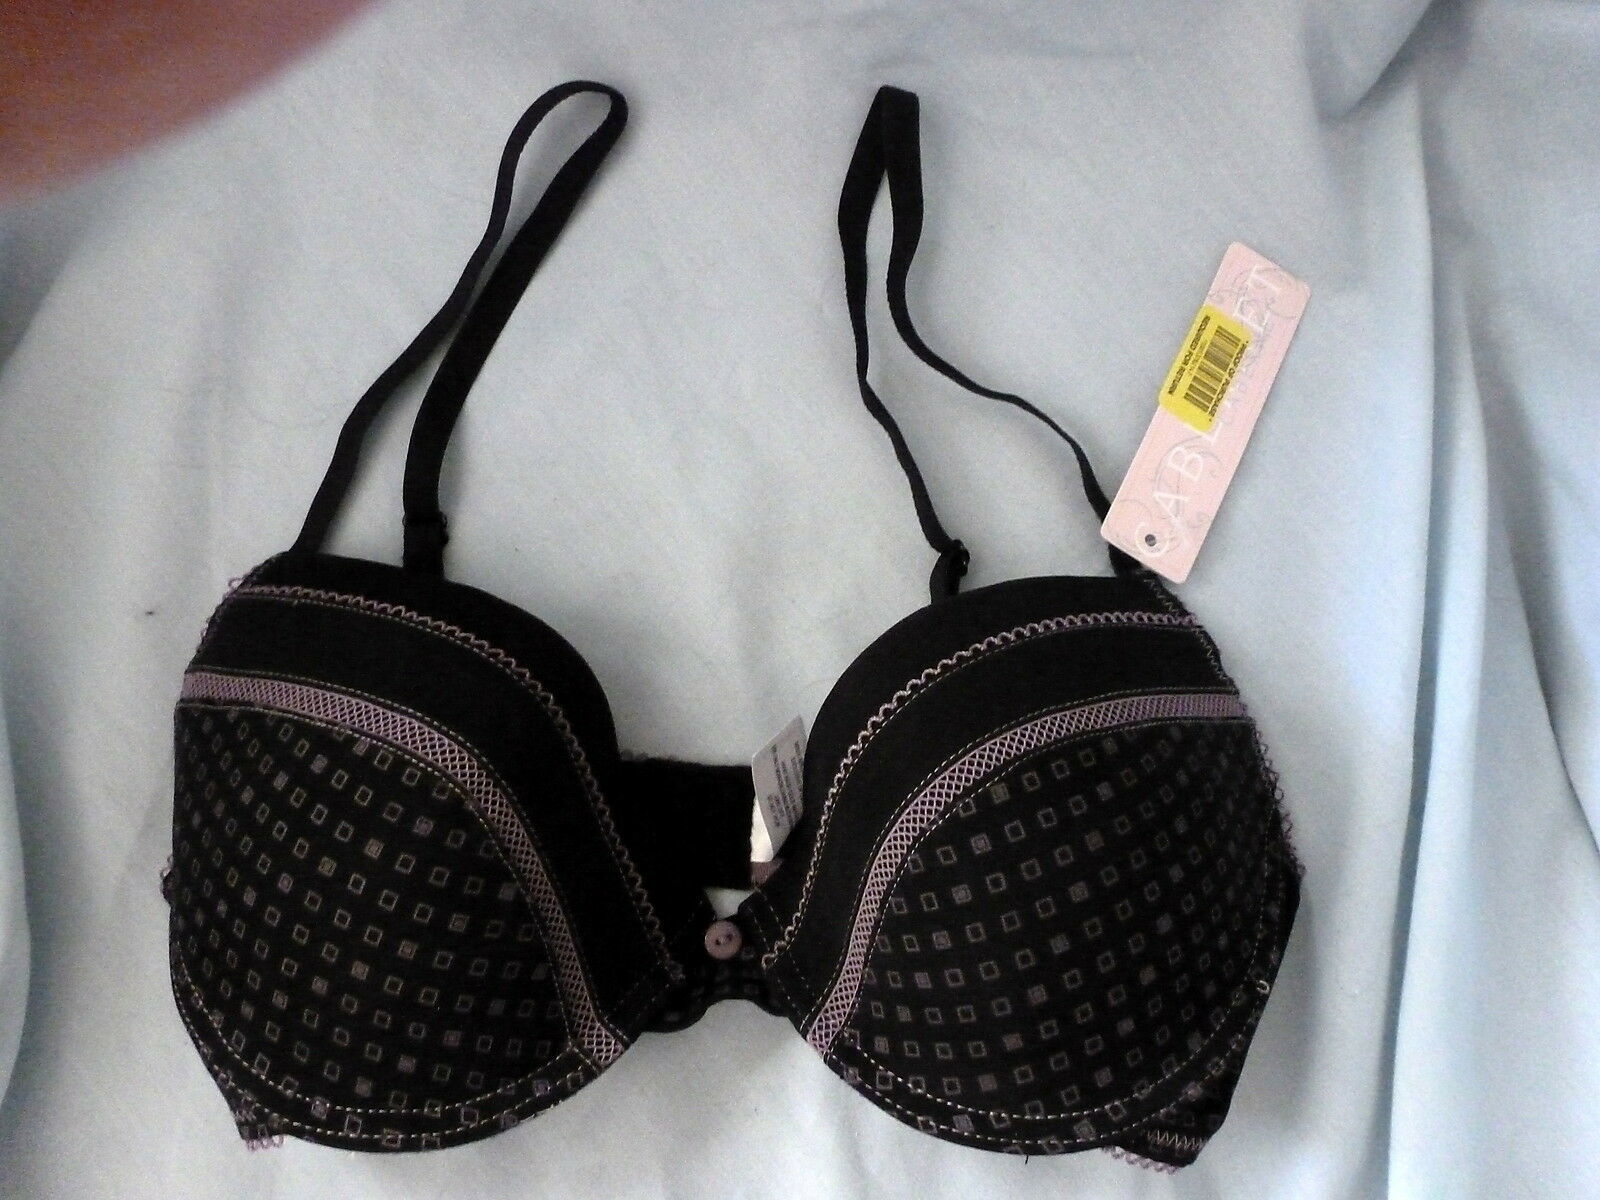 BRA Cabernet 34C Lavender and Black Padded and 50 similar items